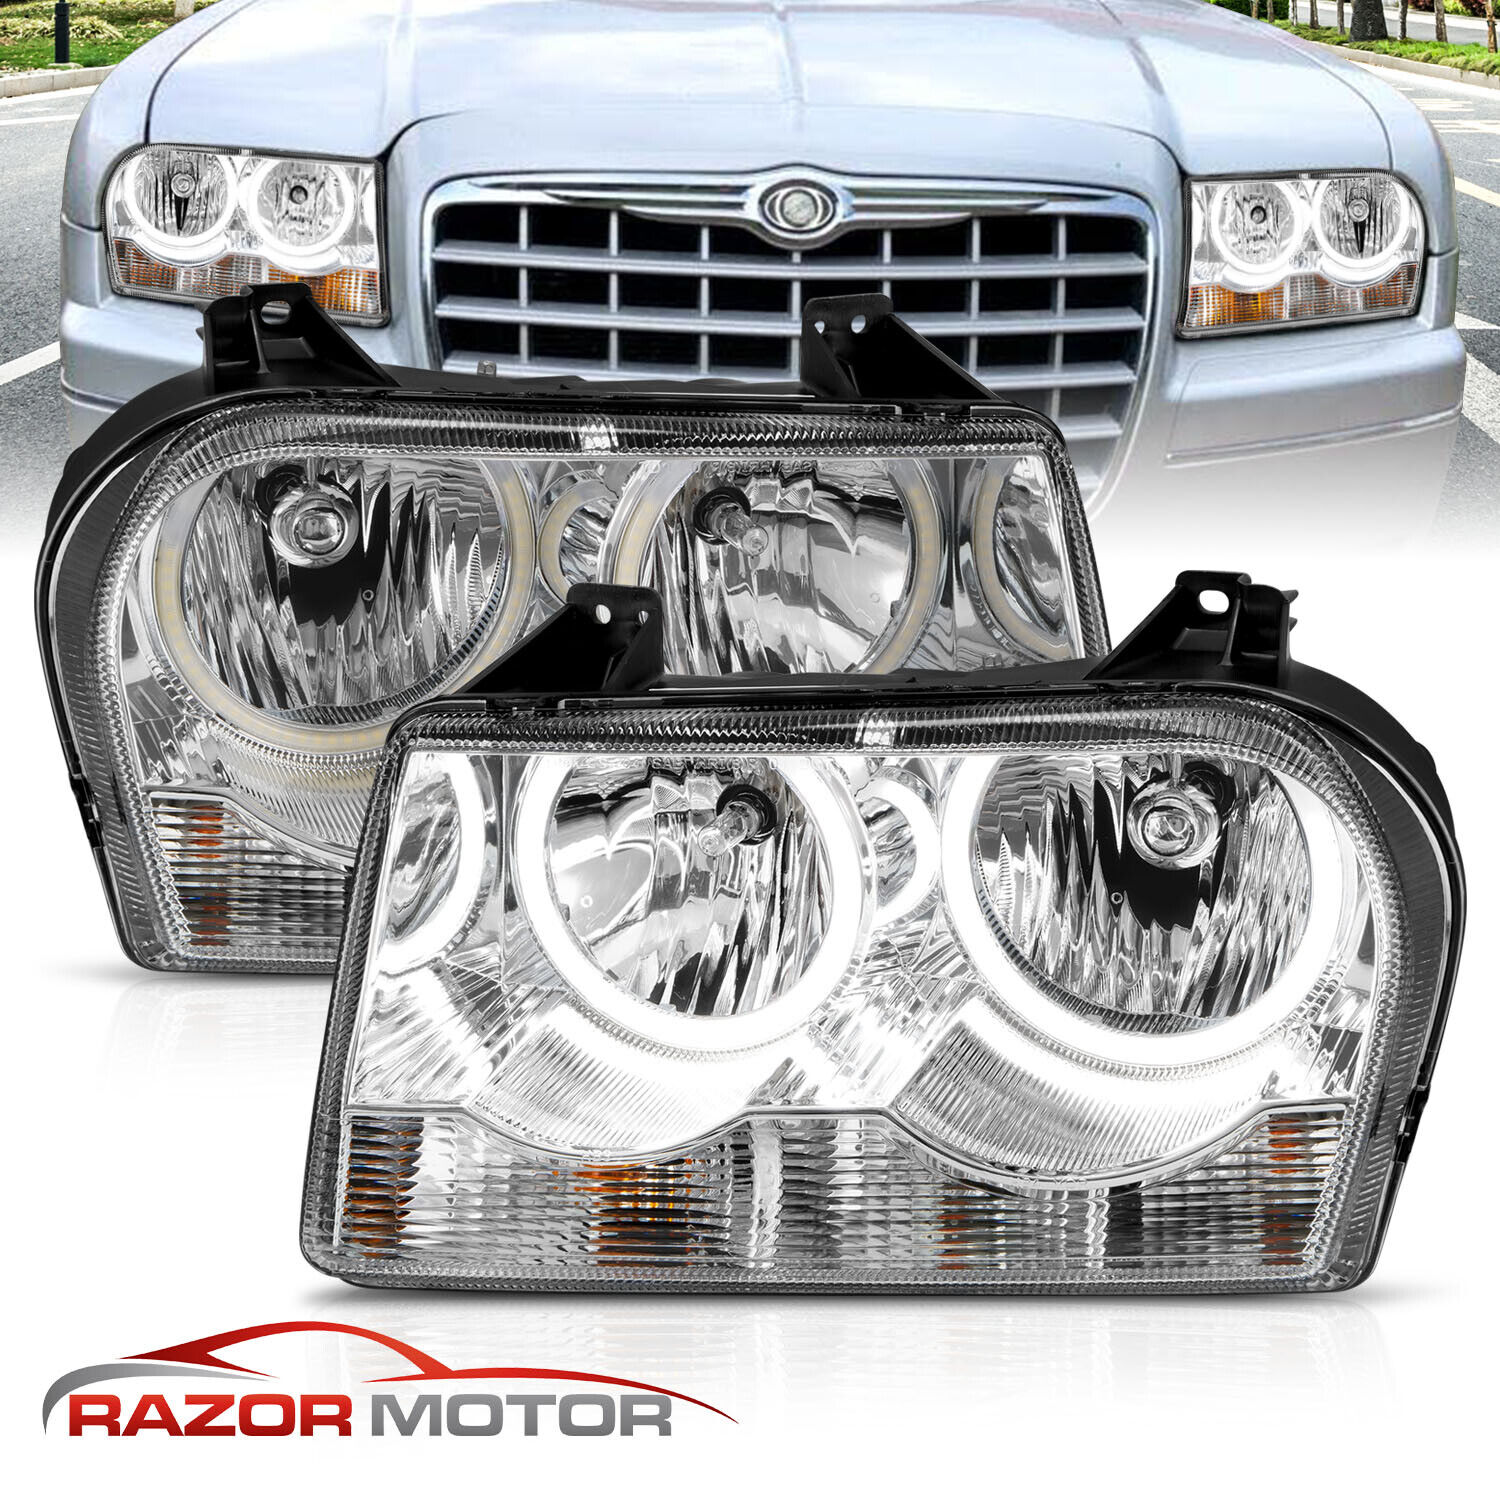 [Dual LED Ring] 2005-2010 For Chrysler 300 Chrome Halos Replacement Headlights